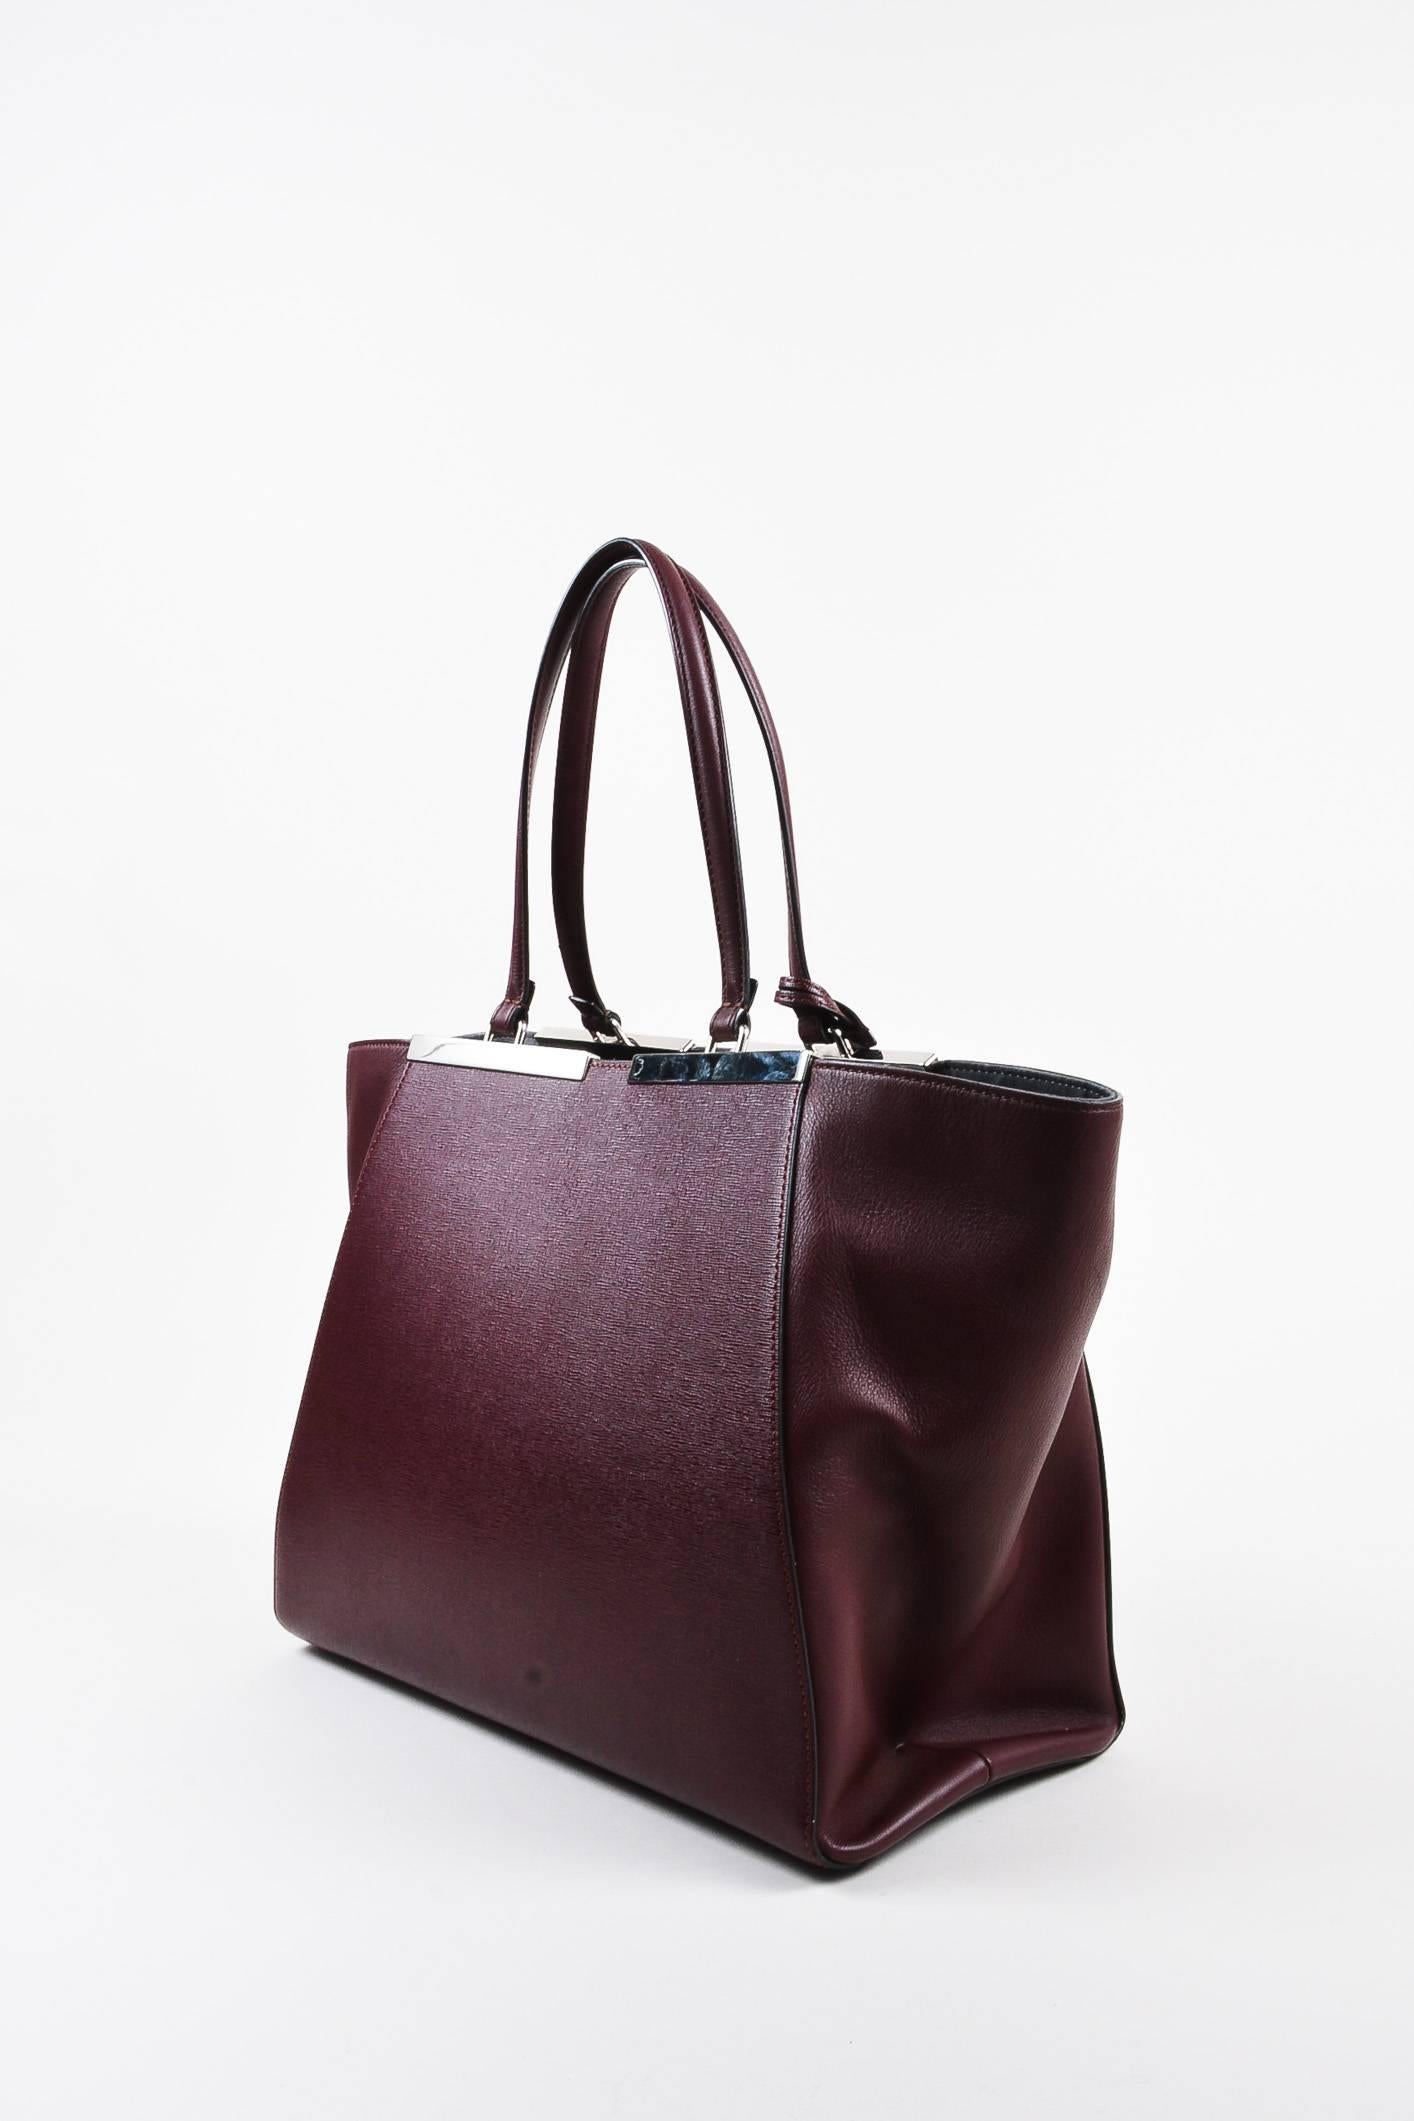 Retails at $2550. Sleek tote to carry your everyday work essentials in luxury. Trapeze shape. Handcrafted in Italy. Supple, buttery calf leather construction; textured detail on front and back. Silver-tone hardware. Top flat handles connected to